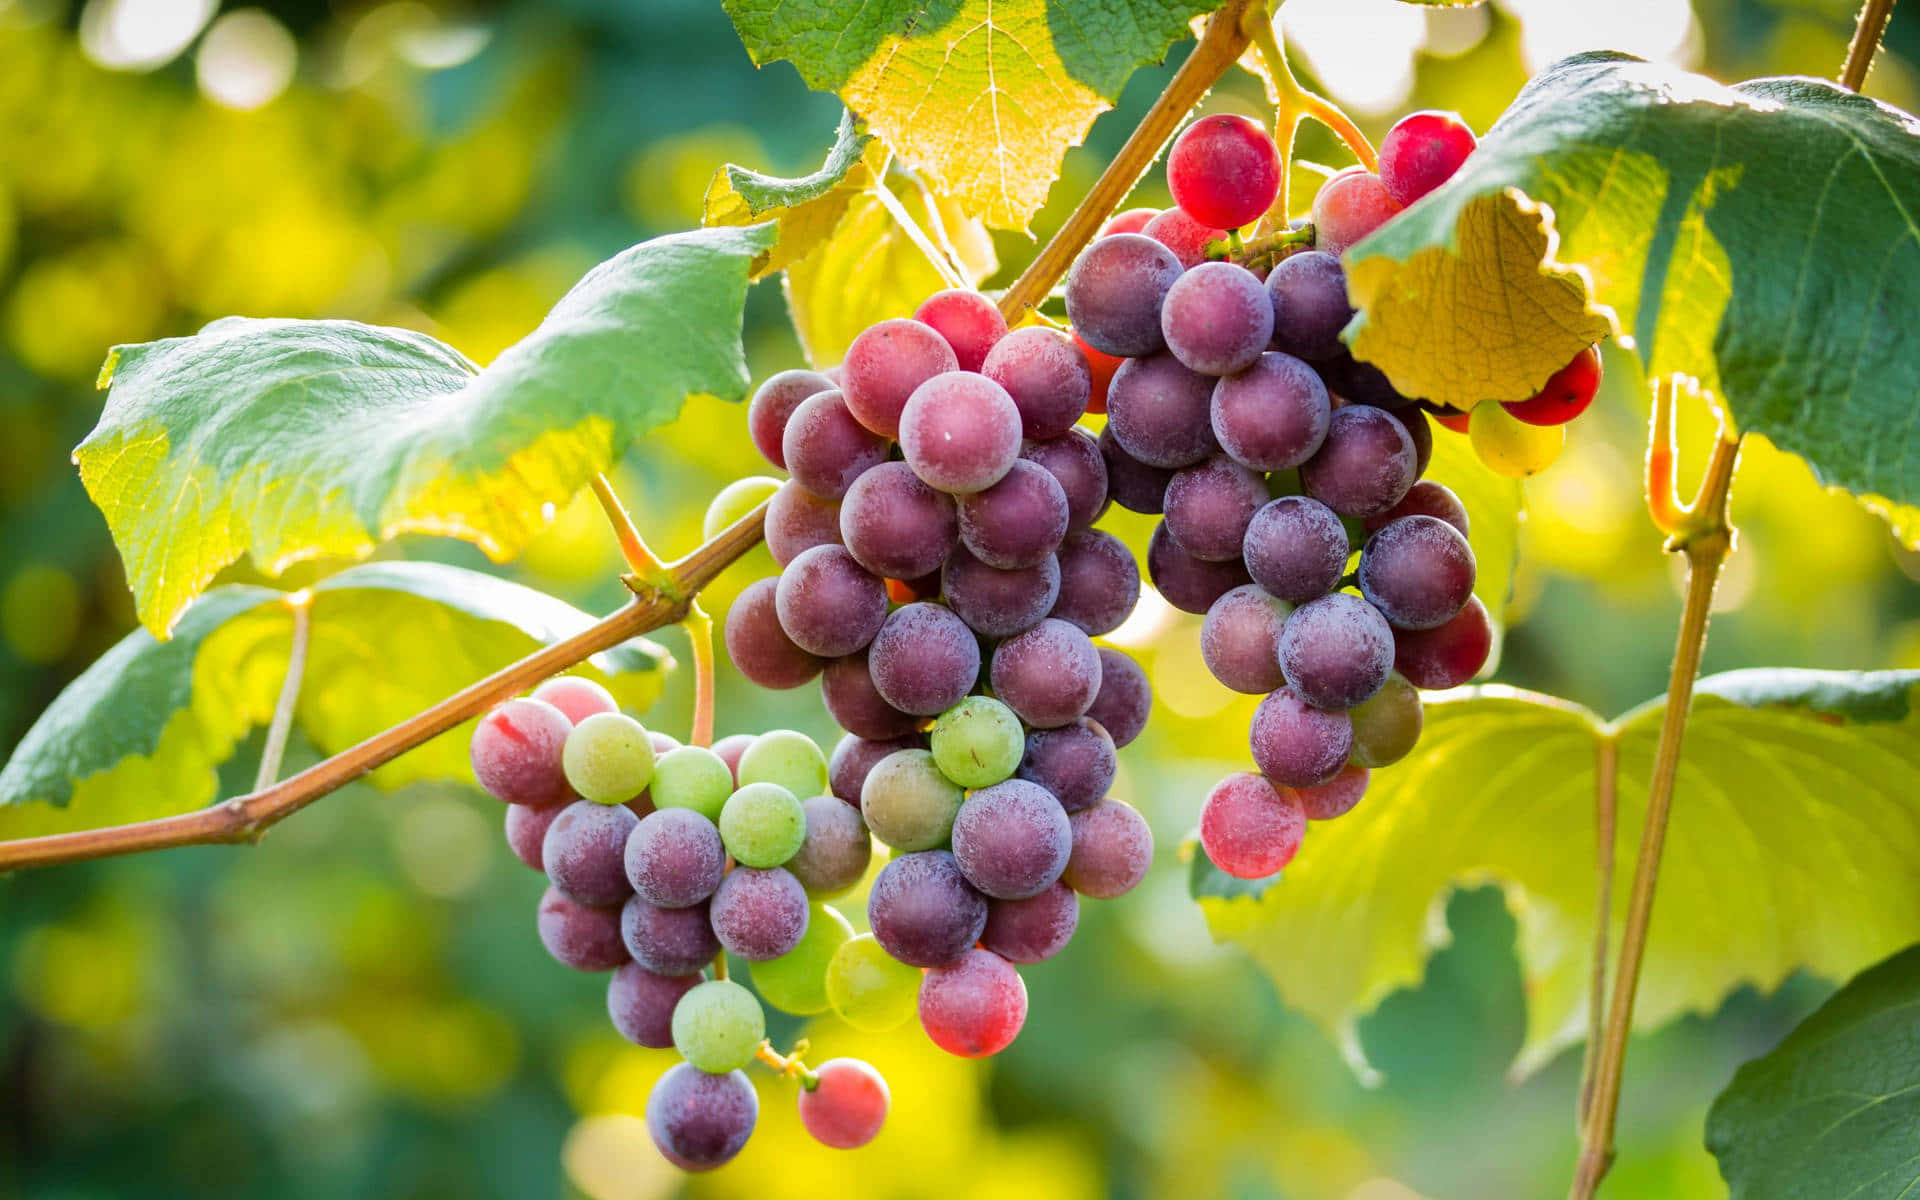 A bunch of ripe juicy grapes hanging from the vine against a soft blurred background.